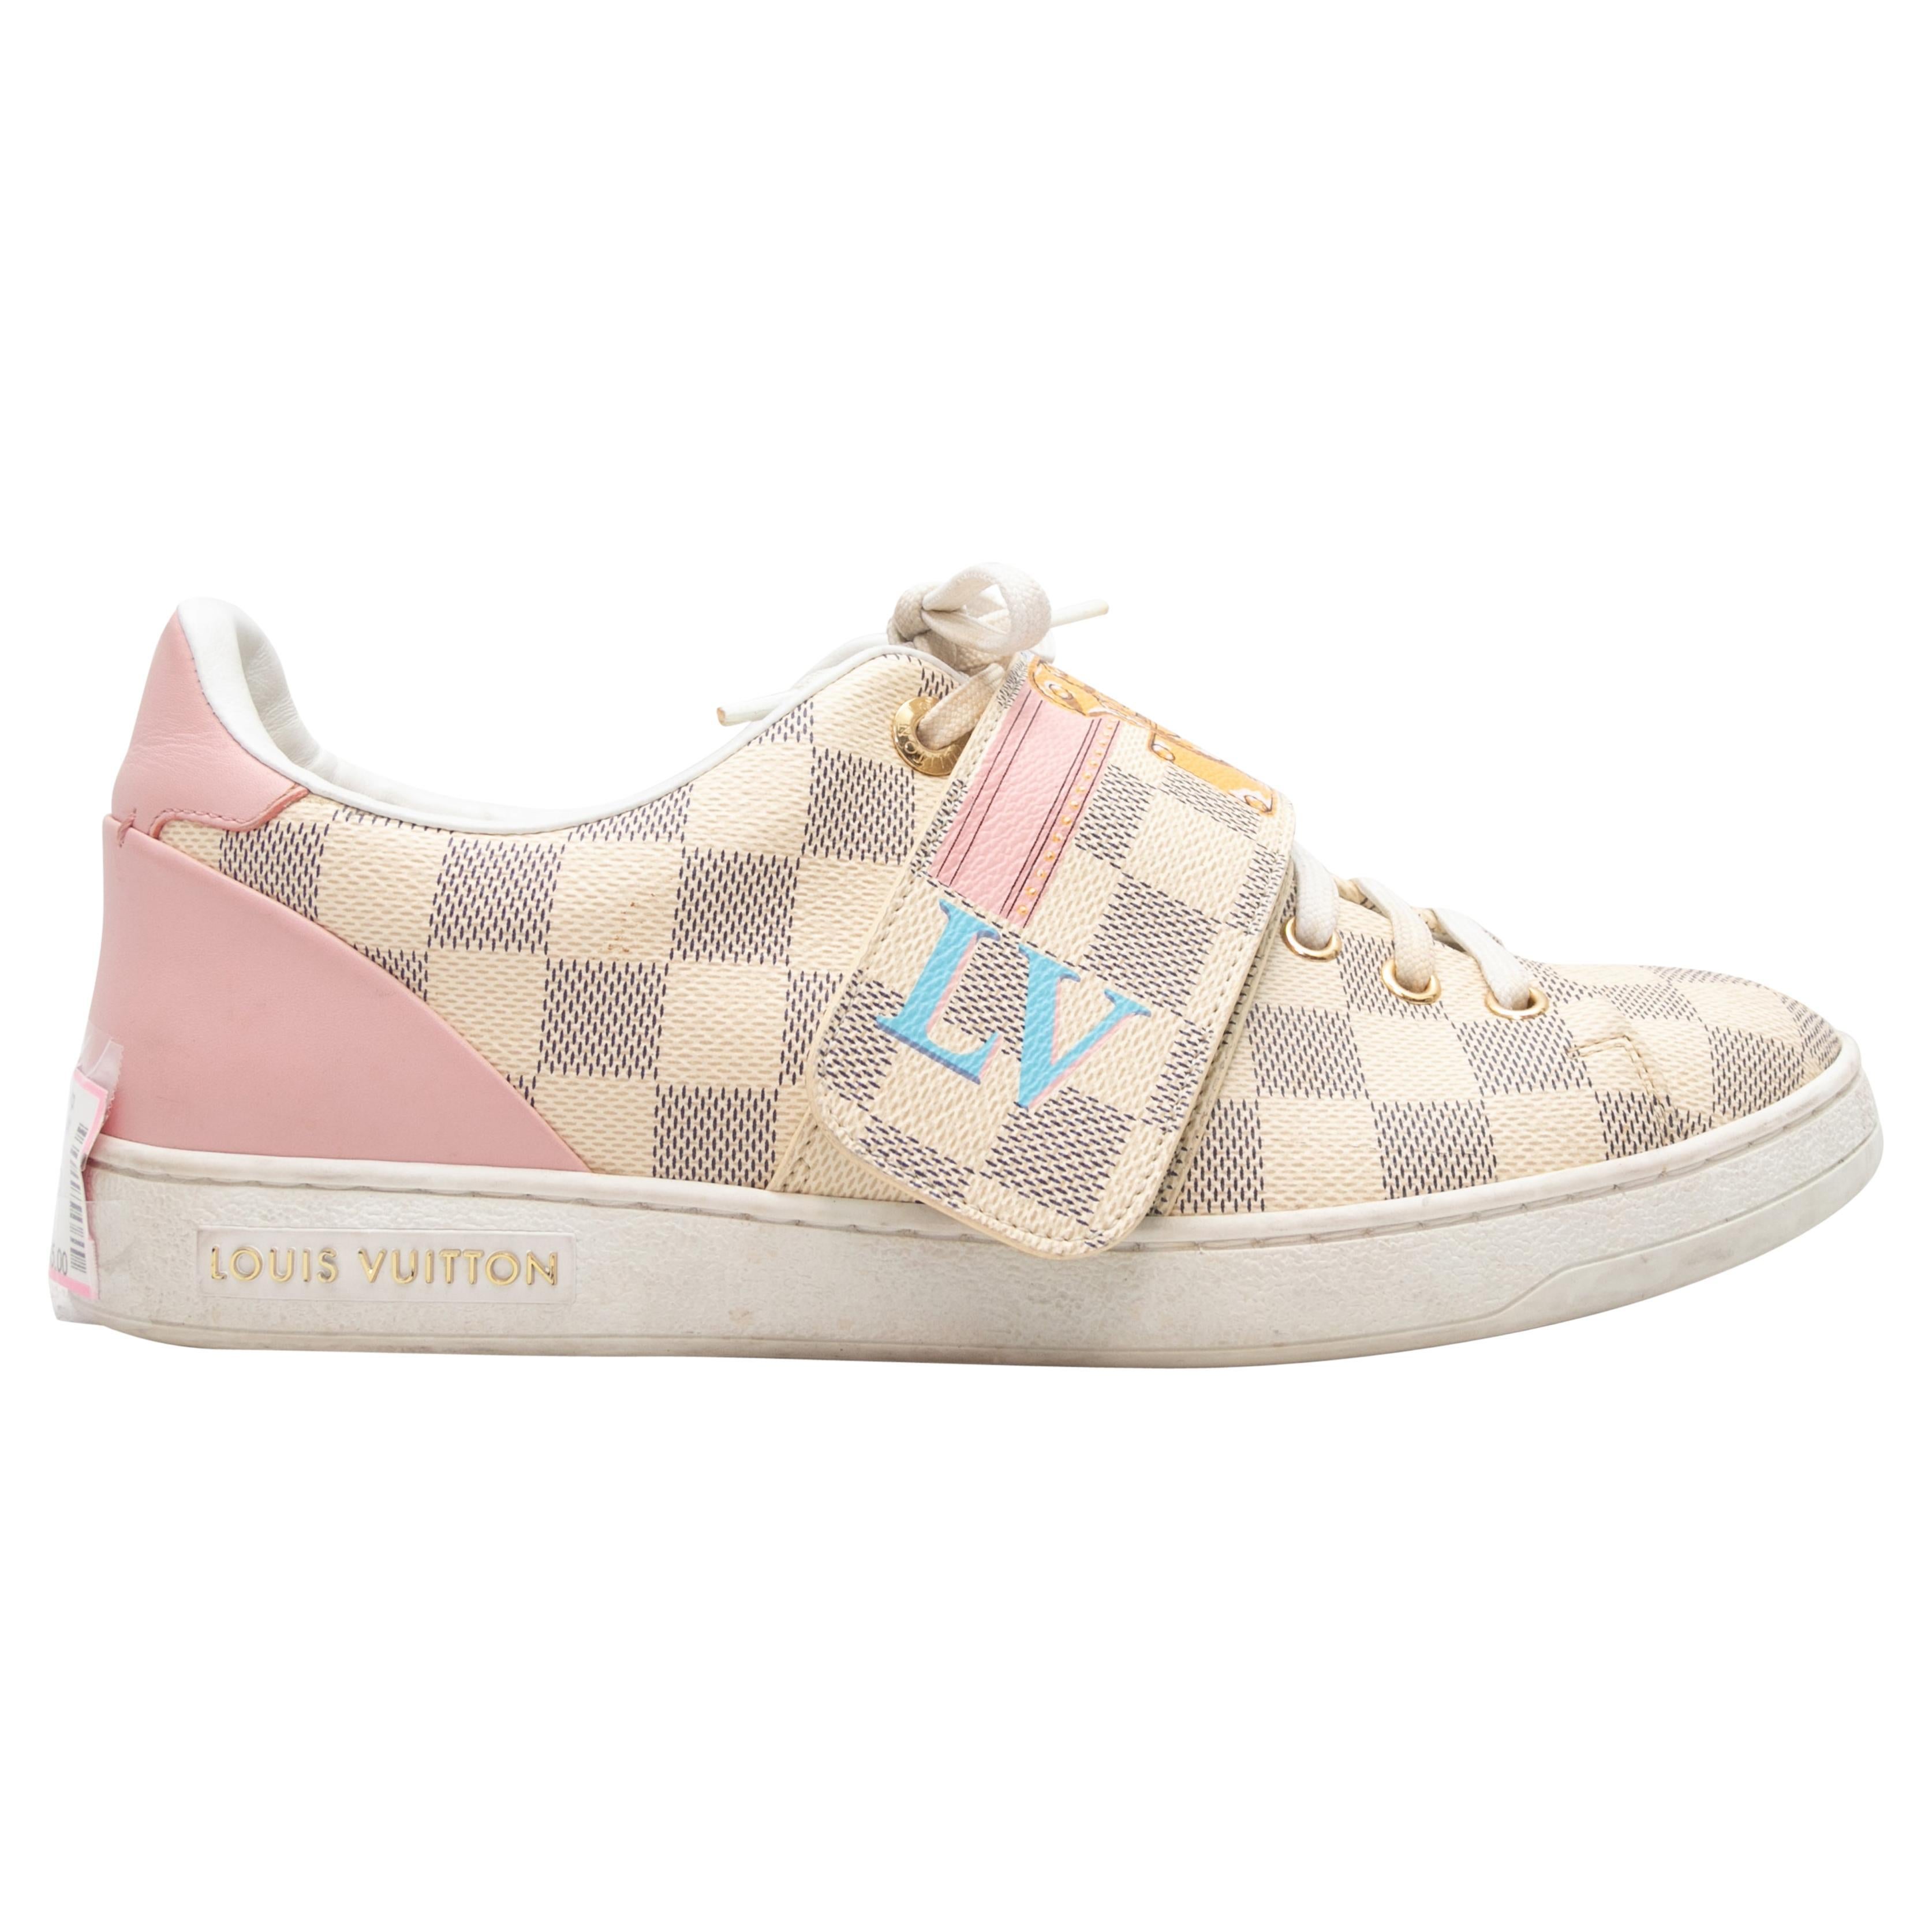 Can I buy Louis Vuitton online?